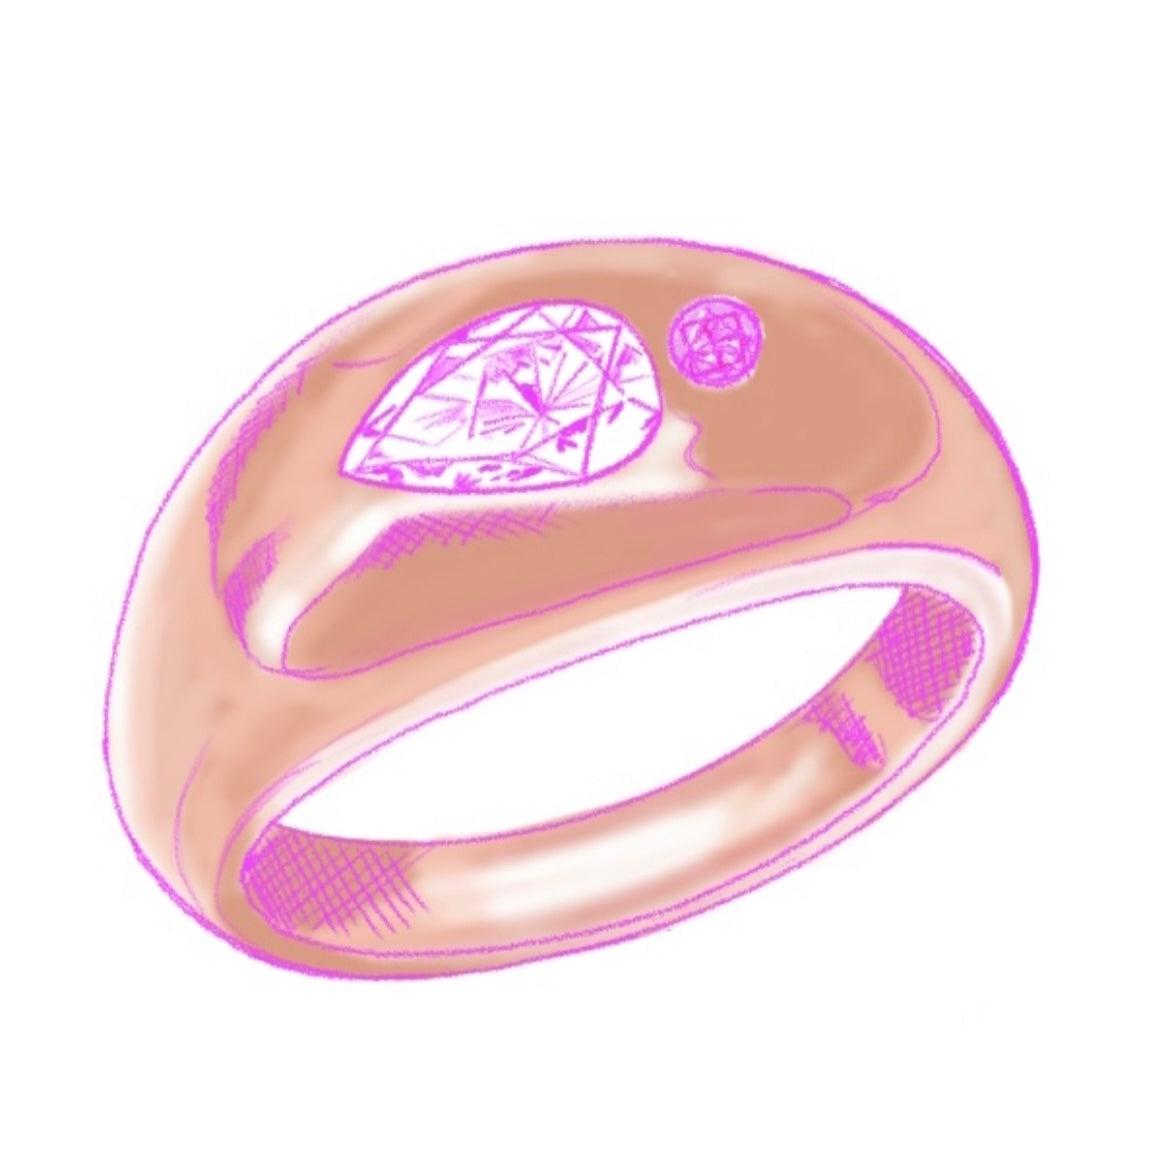 Sketch of domed rose gold and diamond ring with pink sapphire accent stone on white background 